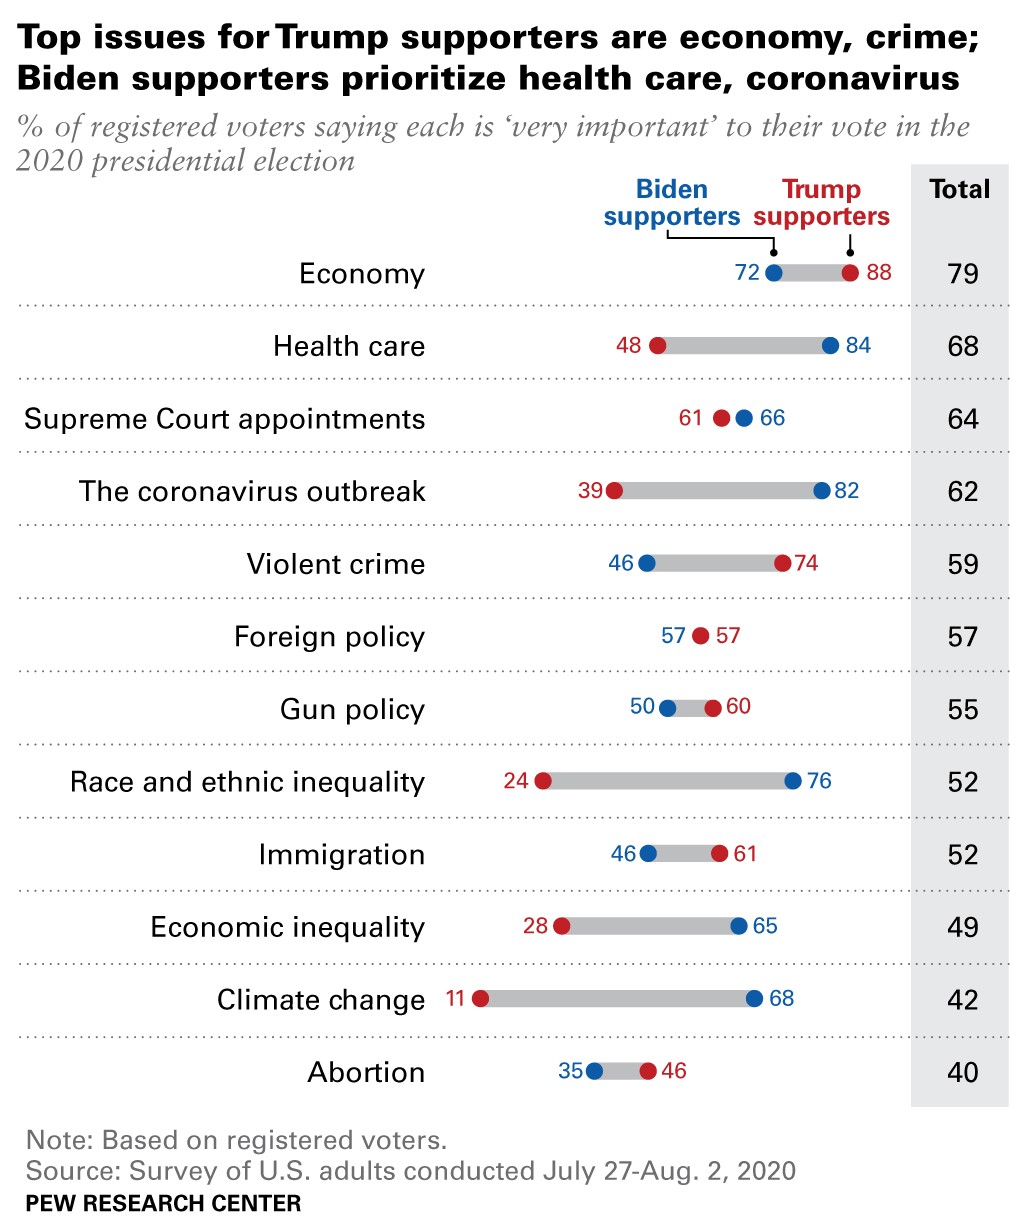 the top issues in our world and what Trump & Biden voters state are "most important" to their vote in the 2020 election.